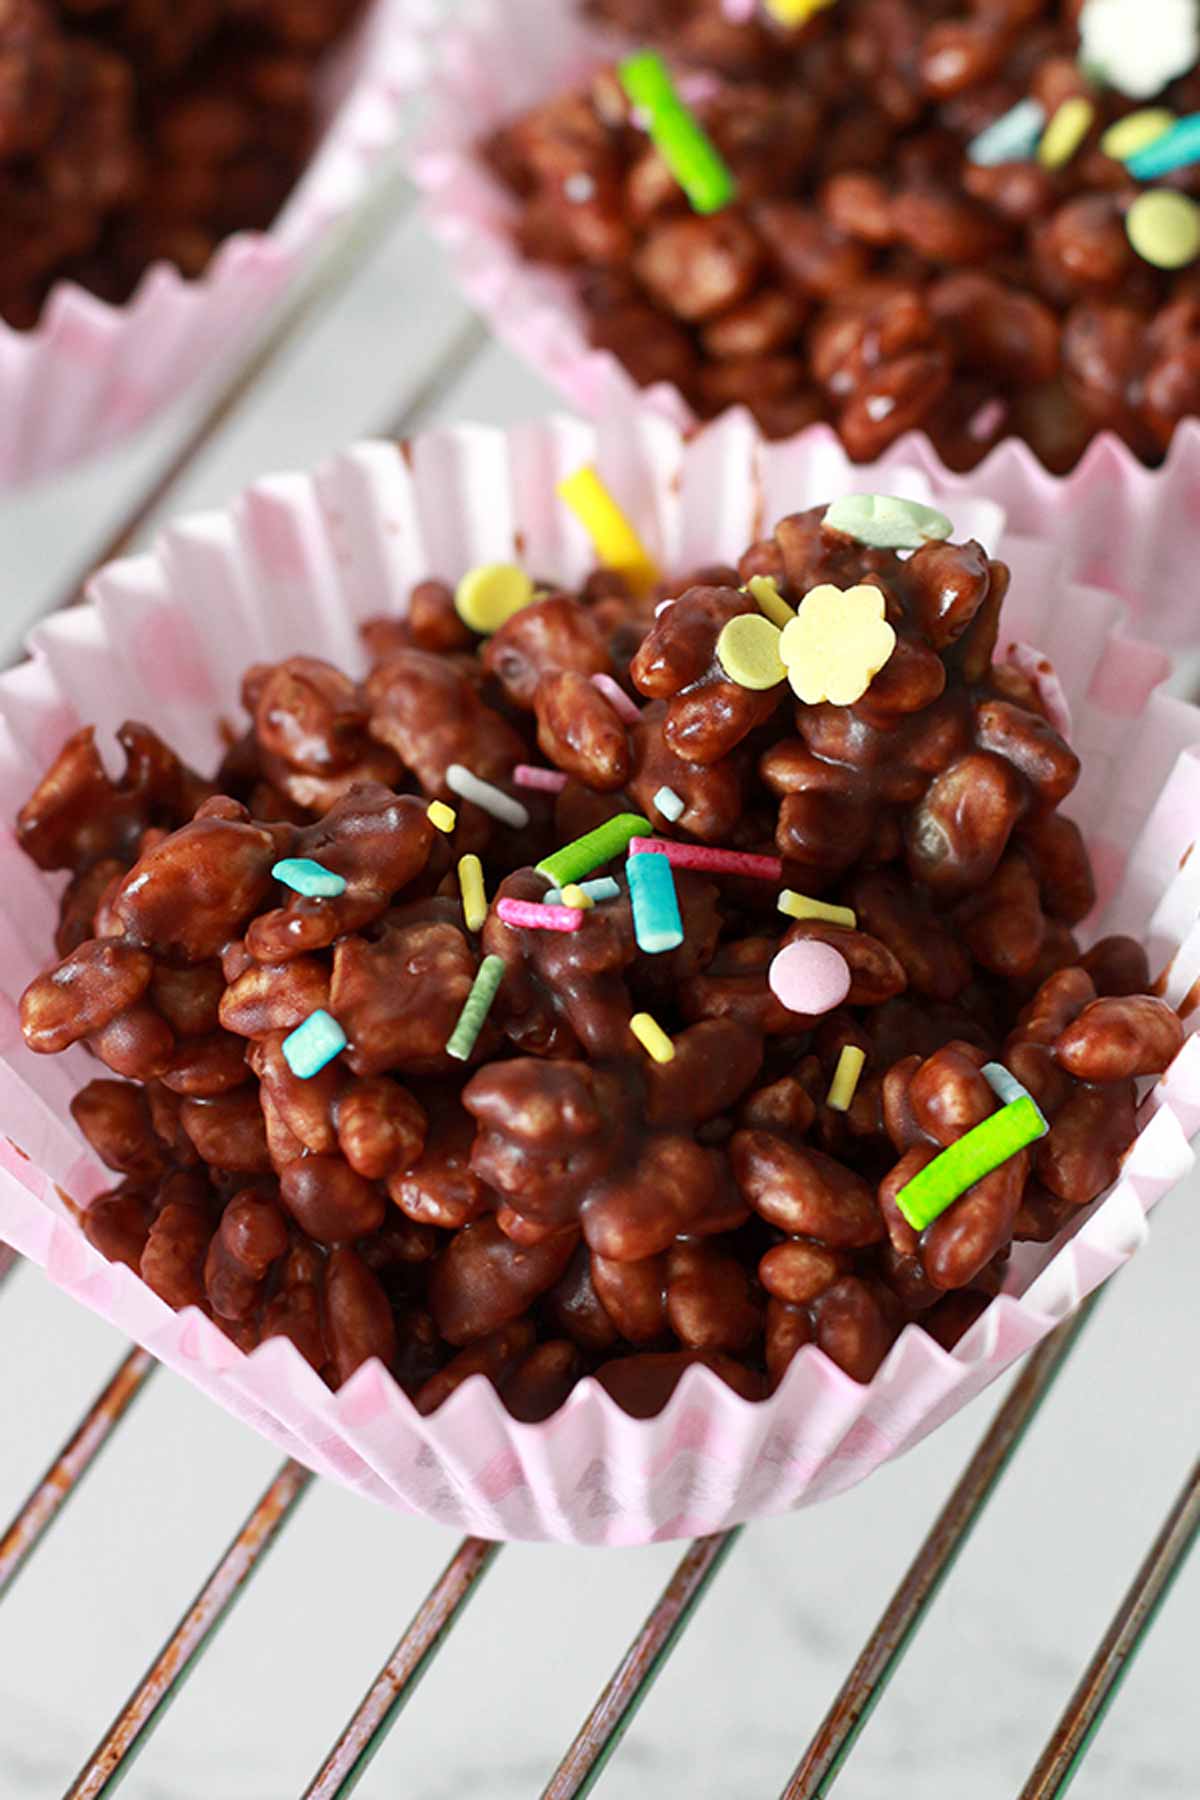 Chocolate Rice Crispy Cake In A Pink Case